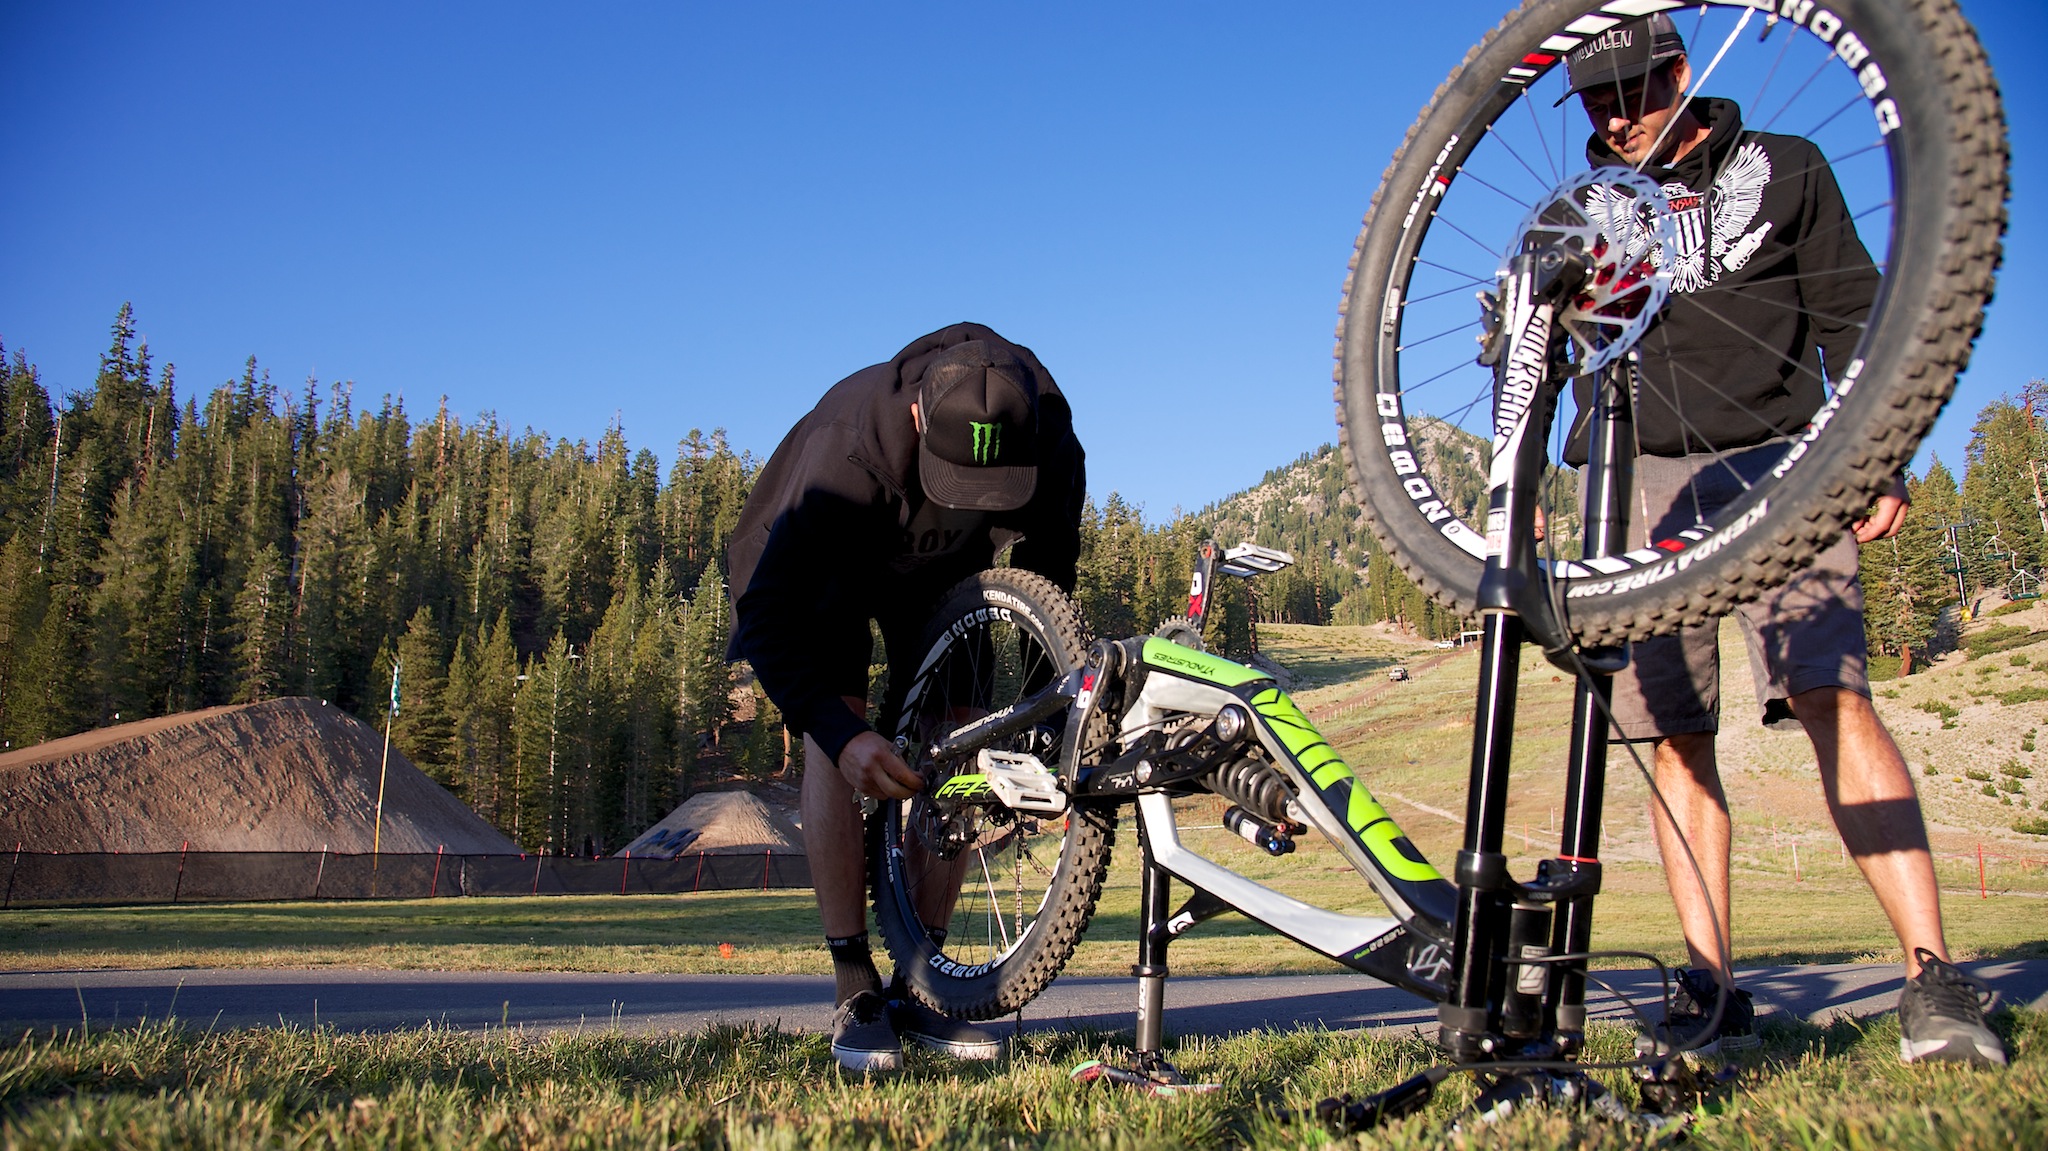 Cam Zink sets a new benchmark in mountain bike progression